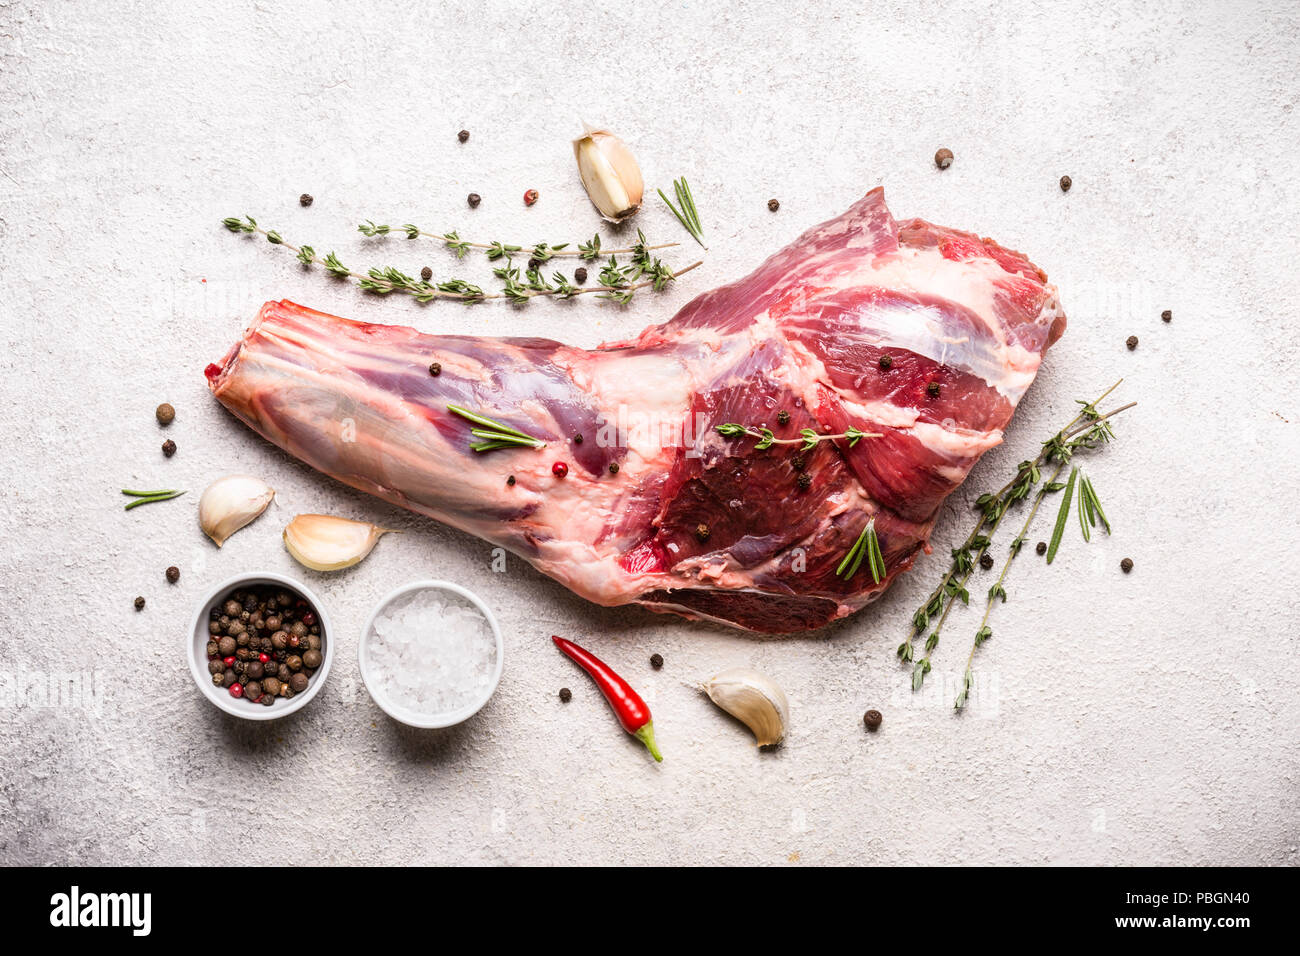 Raw fresh Lamb Meat shank and seasonings on a gray concrete background Stock Photo